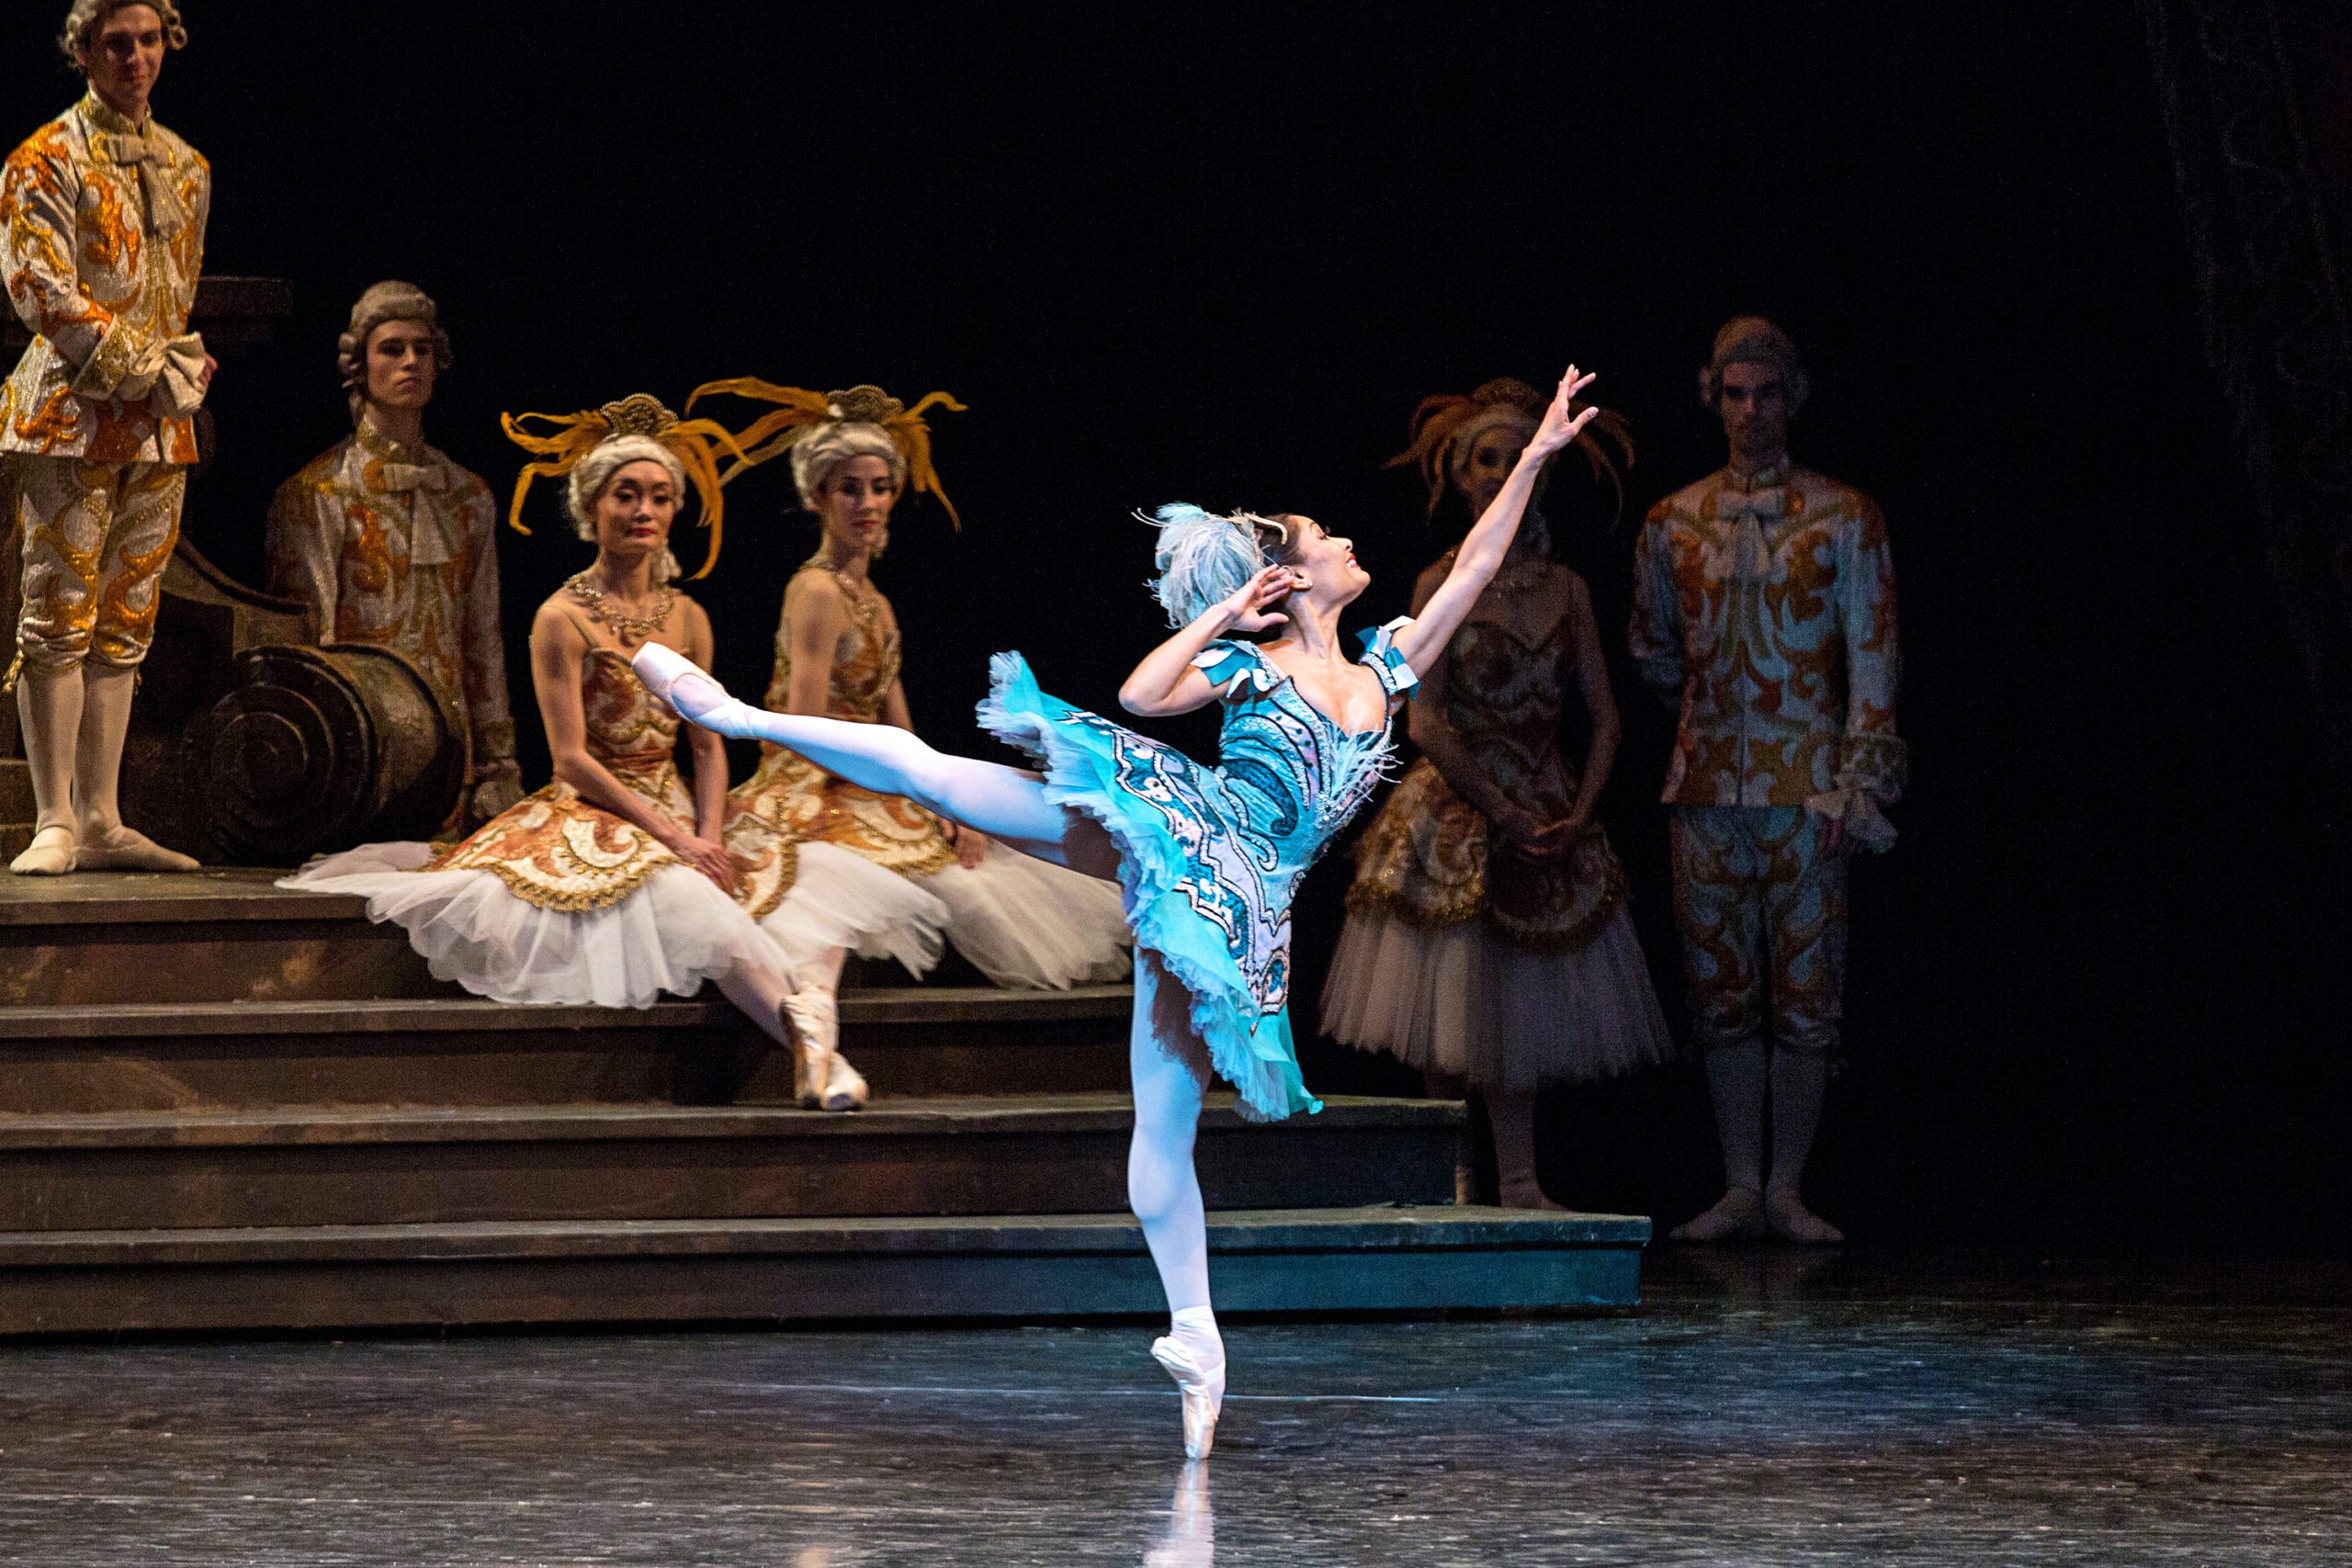 Tina Pereira performs in The Sleeping Beauty onstage. She wears a bright blue tutu and feathered headpiece, pink tights and pink pointe shoes. She performs a first arabesque with her right leg behind her, and she bends her right arm in so that her hand grazes her ear. Behind her, several dancers in grand costumes sit and stand on a staircase and watch her.